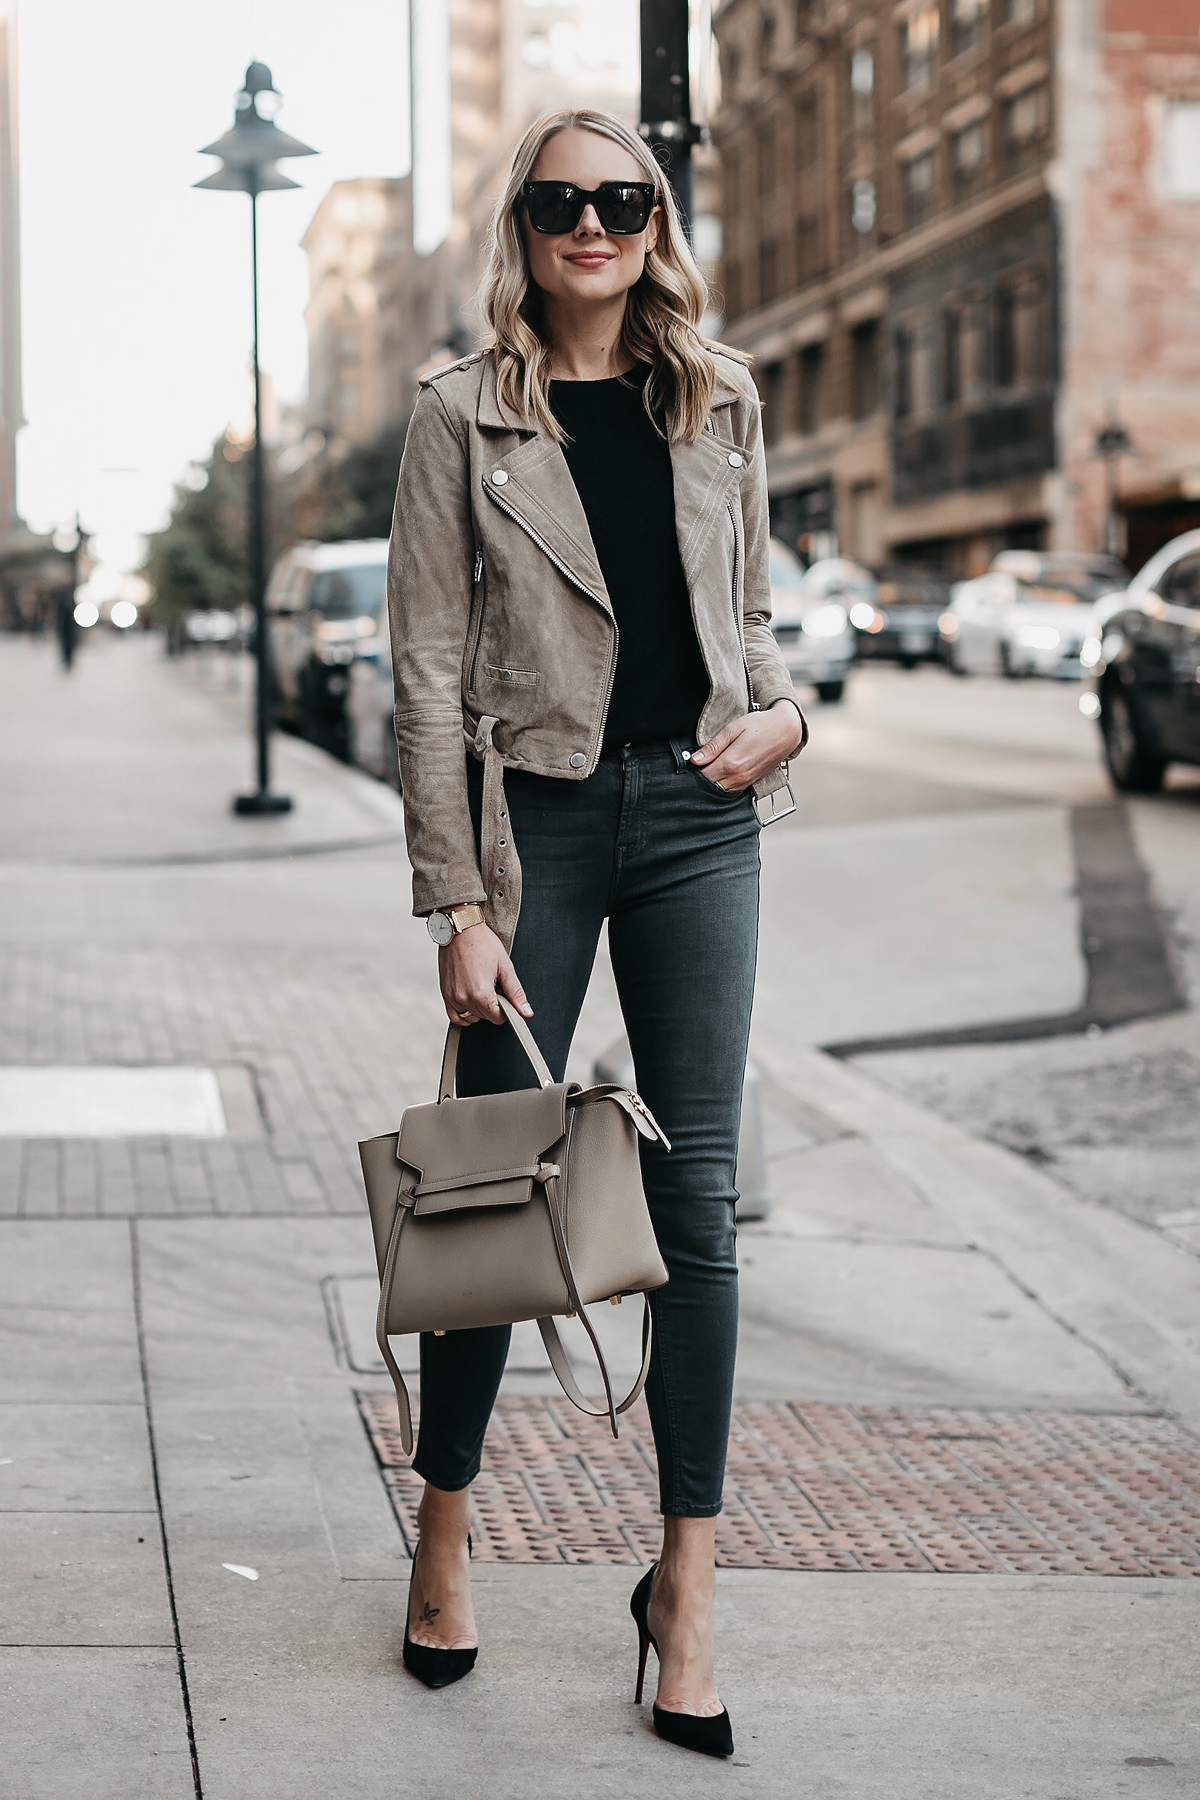 How to style gray skinny jeans